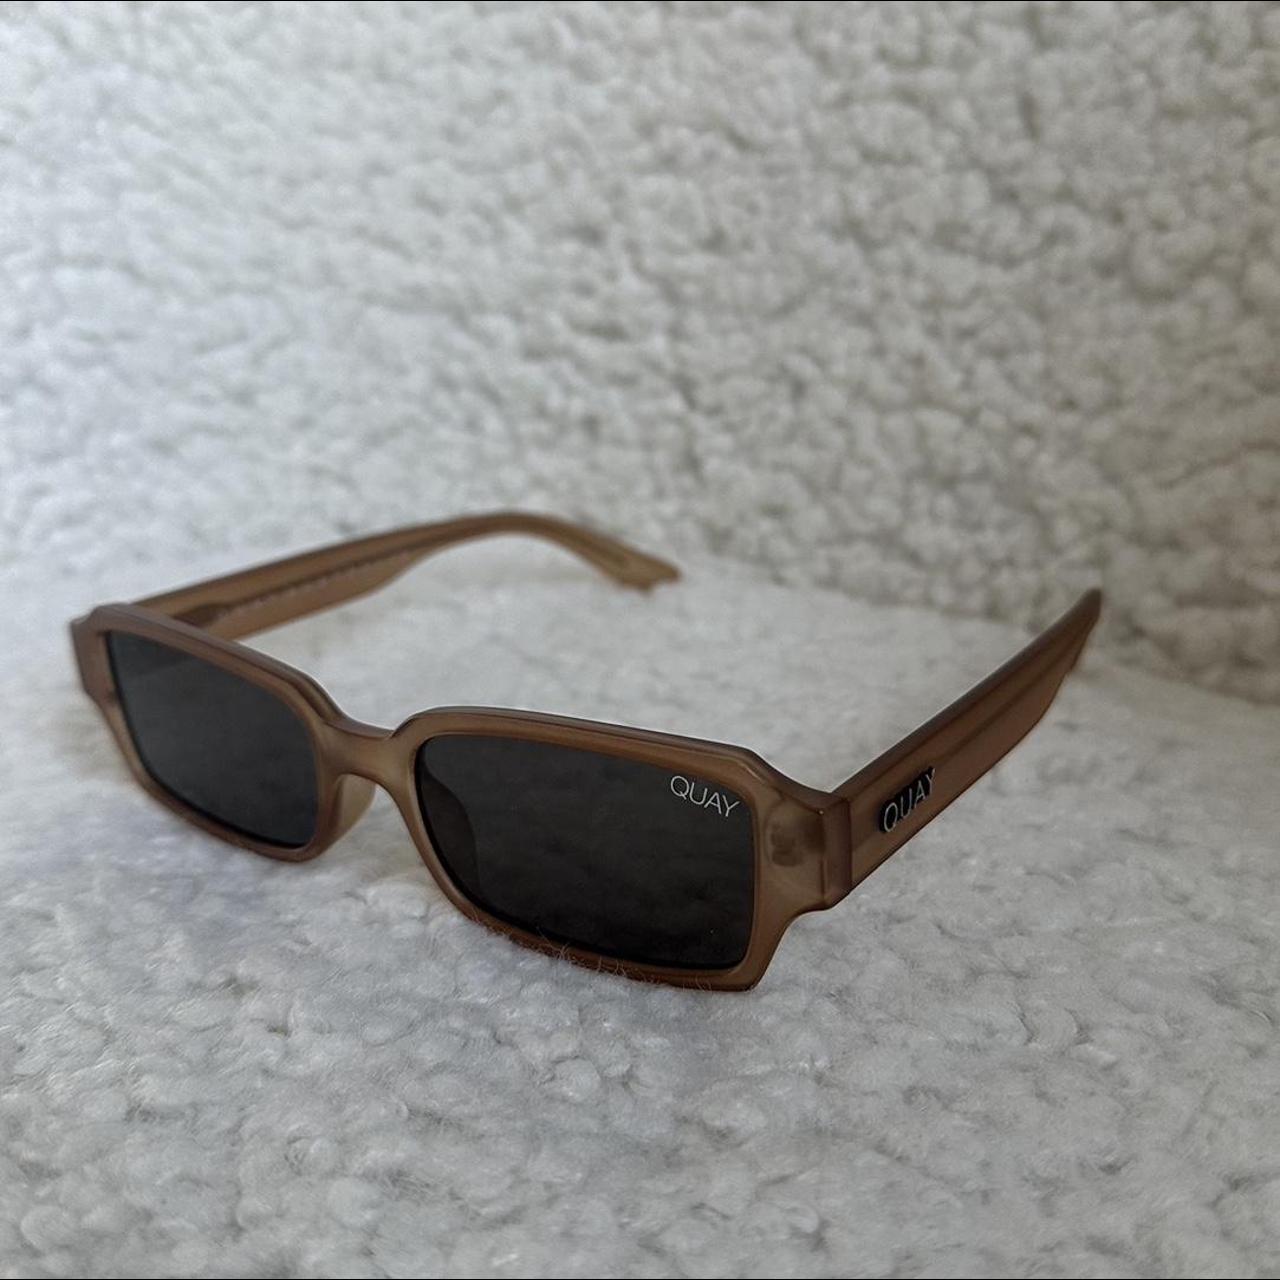 Quay vibe check rectangle sunglasses in brown | ASOS